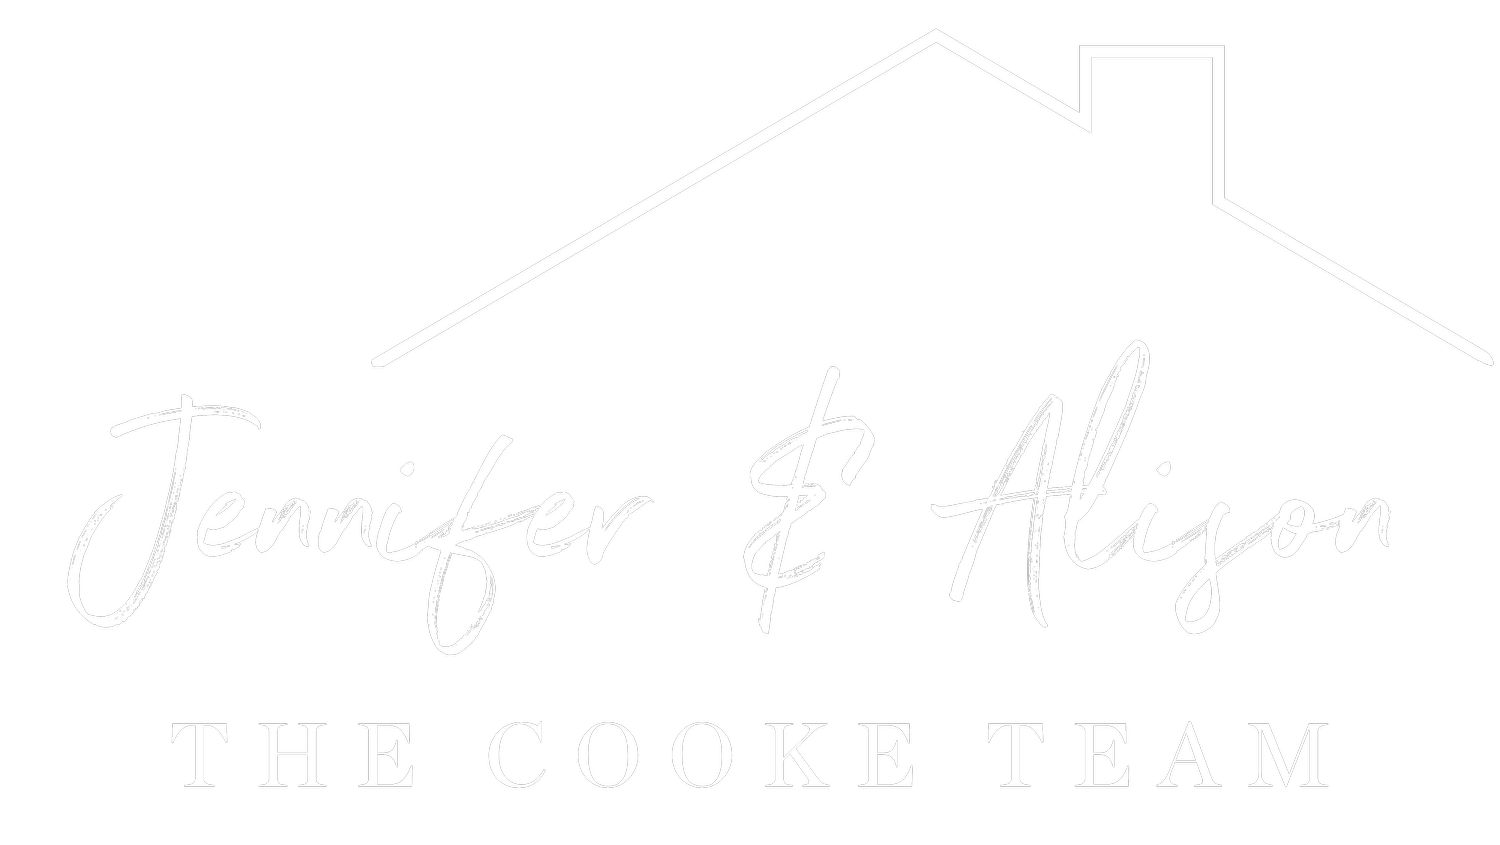 The Cooke Team